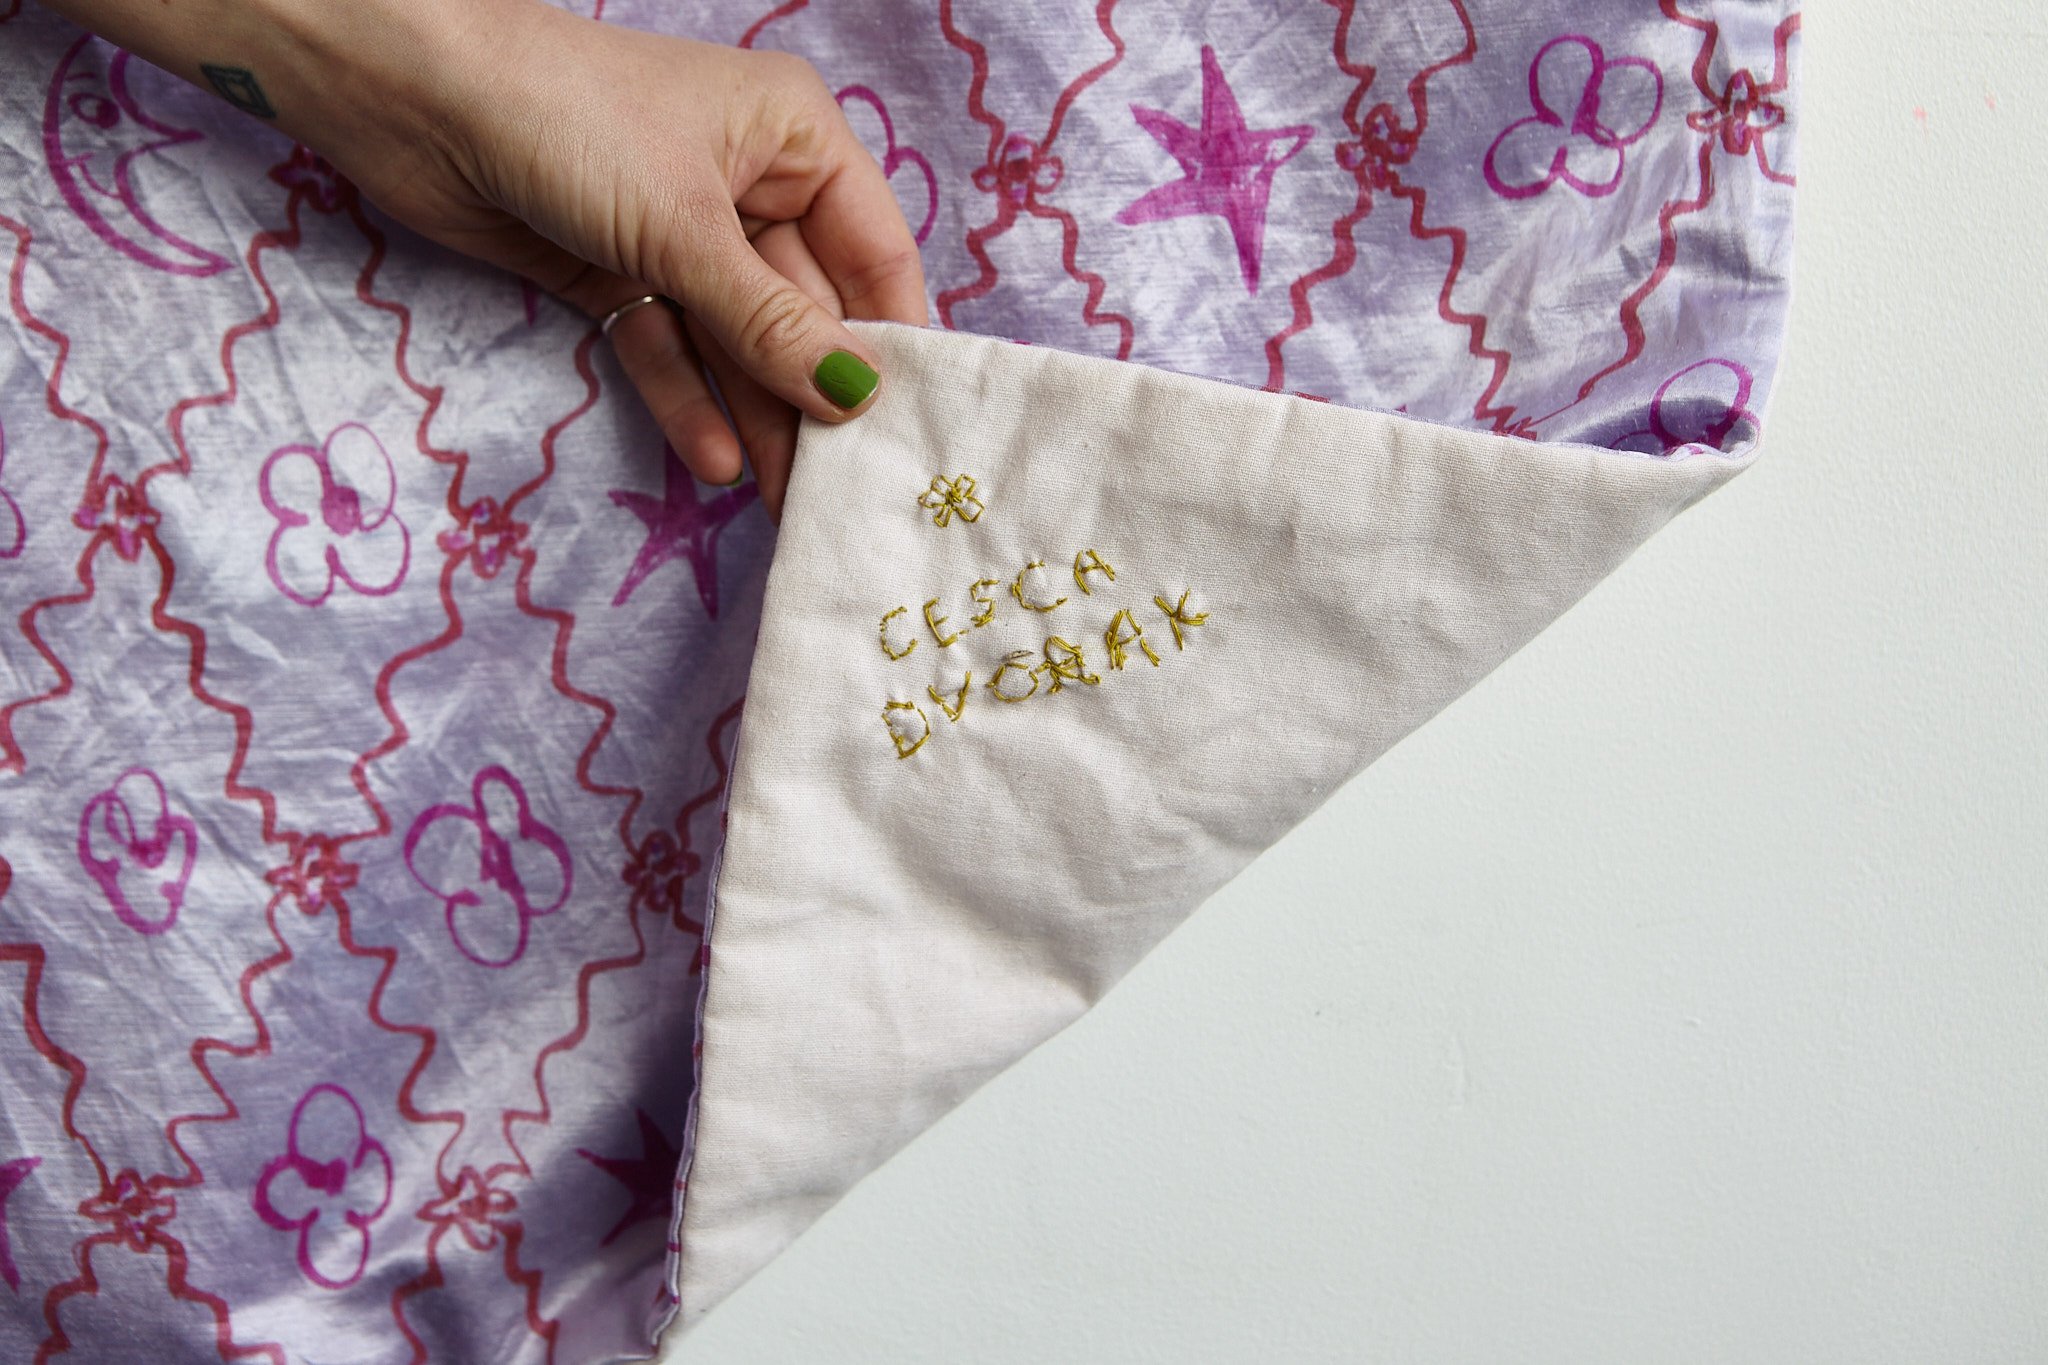 Photograph of Cesca Dvorak hand revealing embroidered name on corner of silk quilt